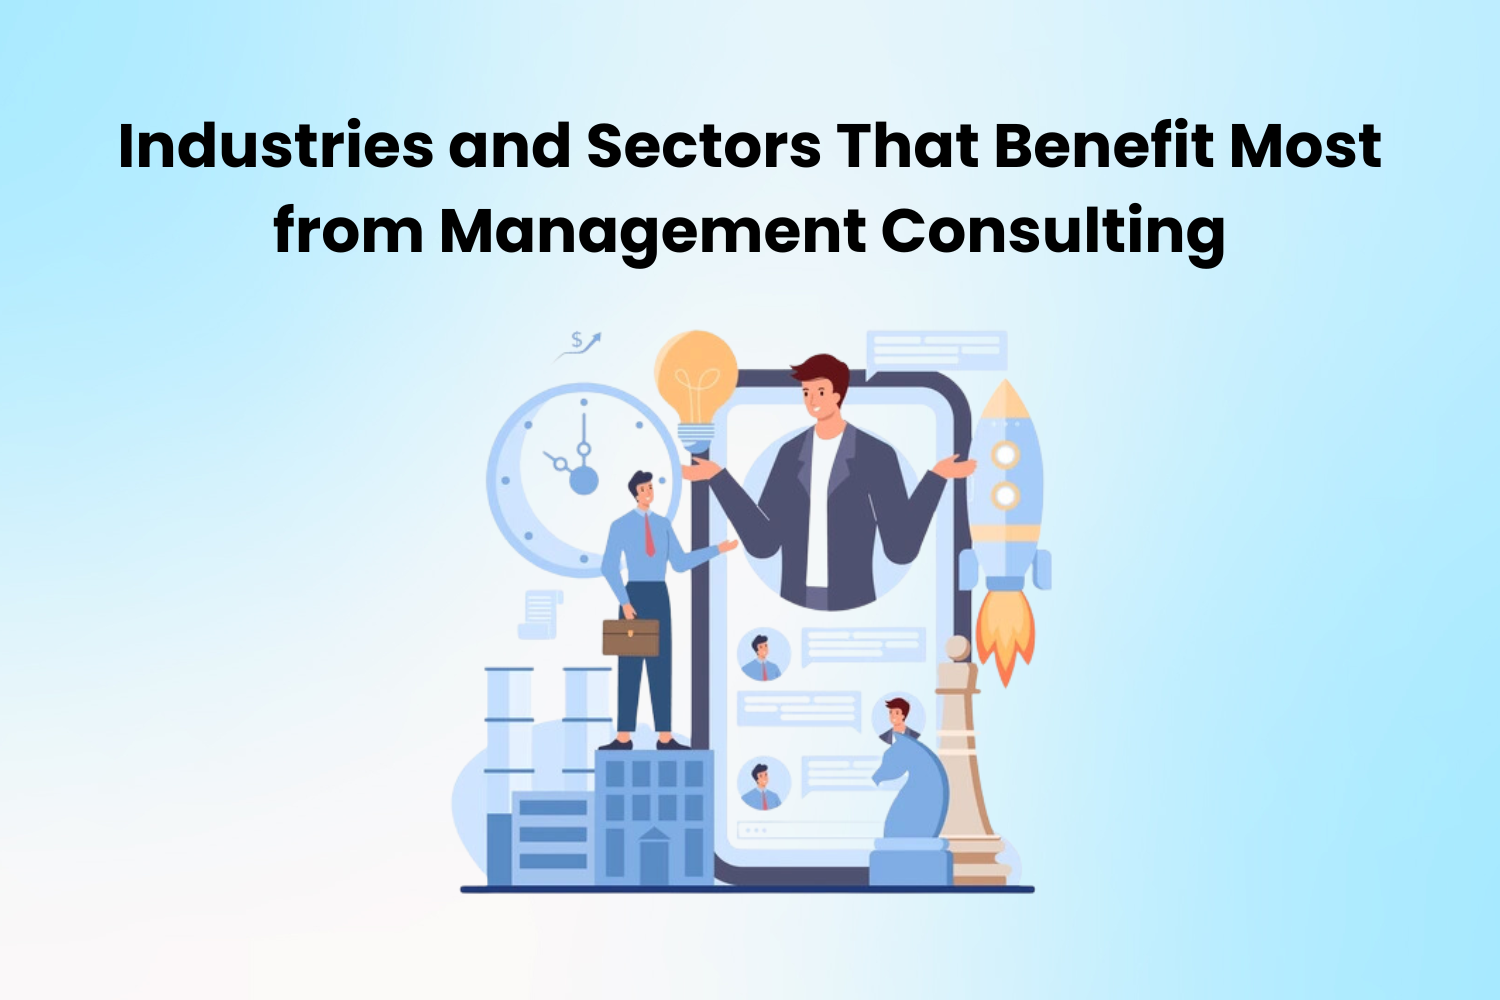 Industries and Sectors That Benefit Most from Management Consulting